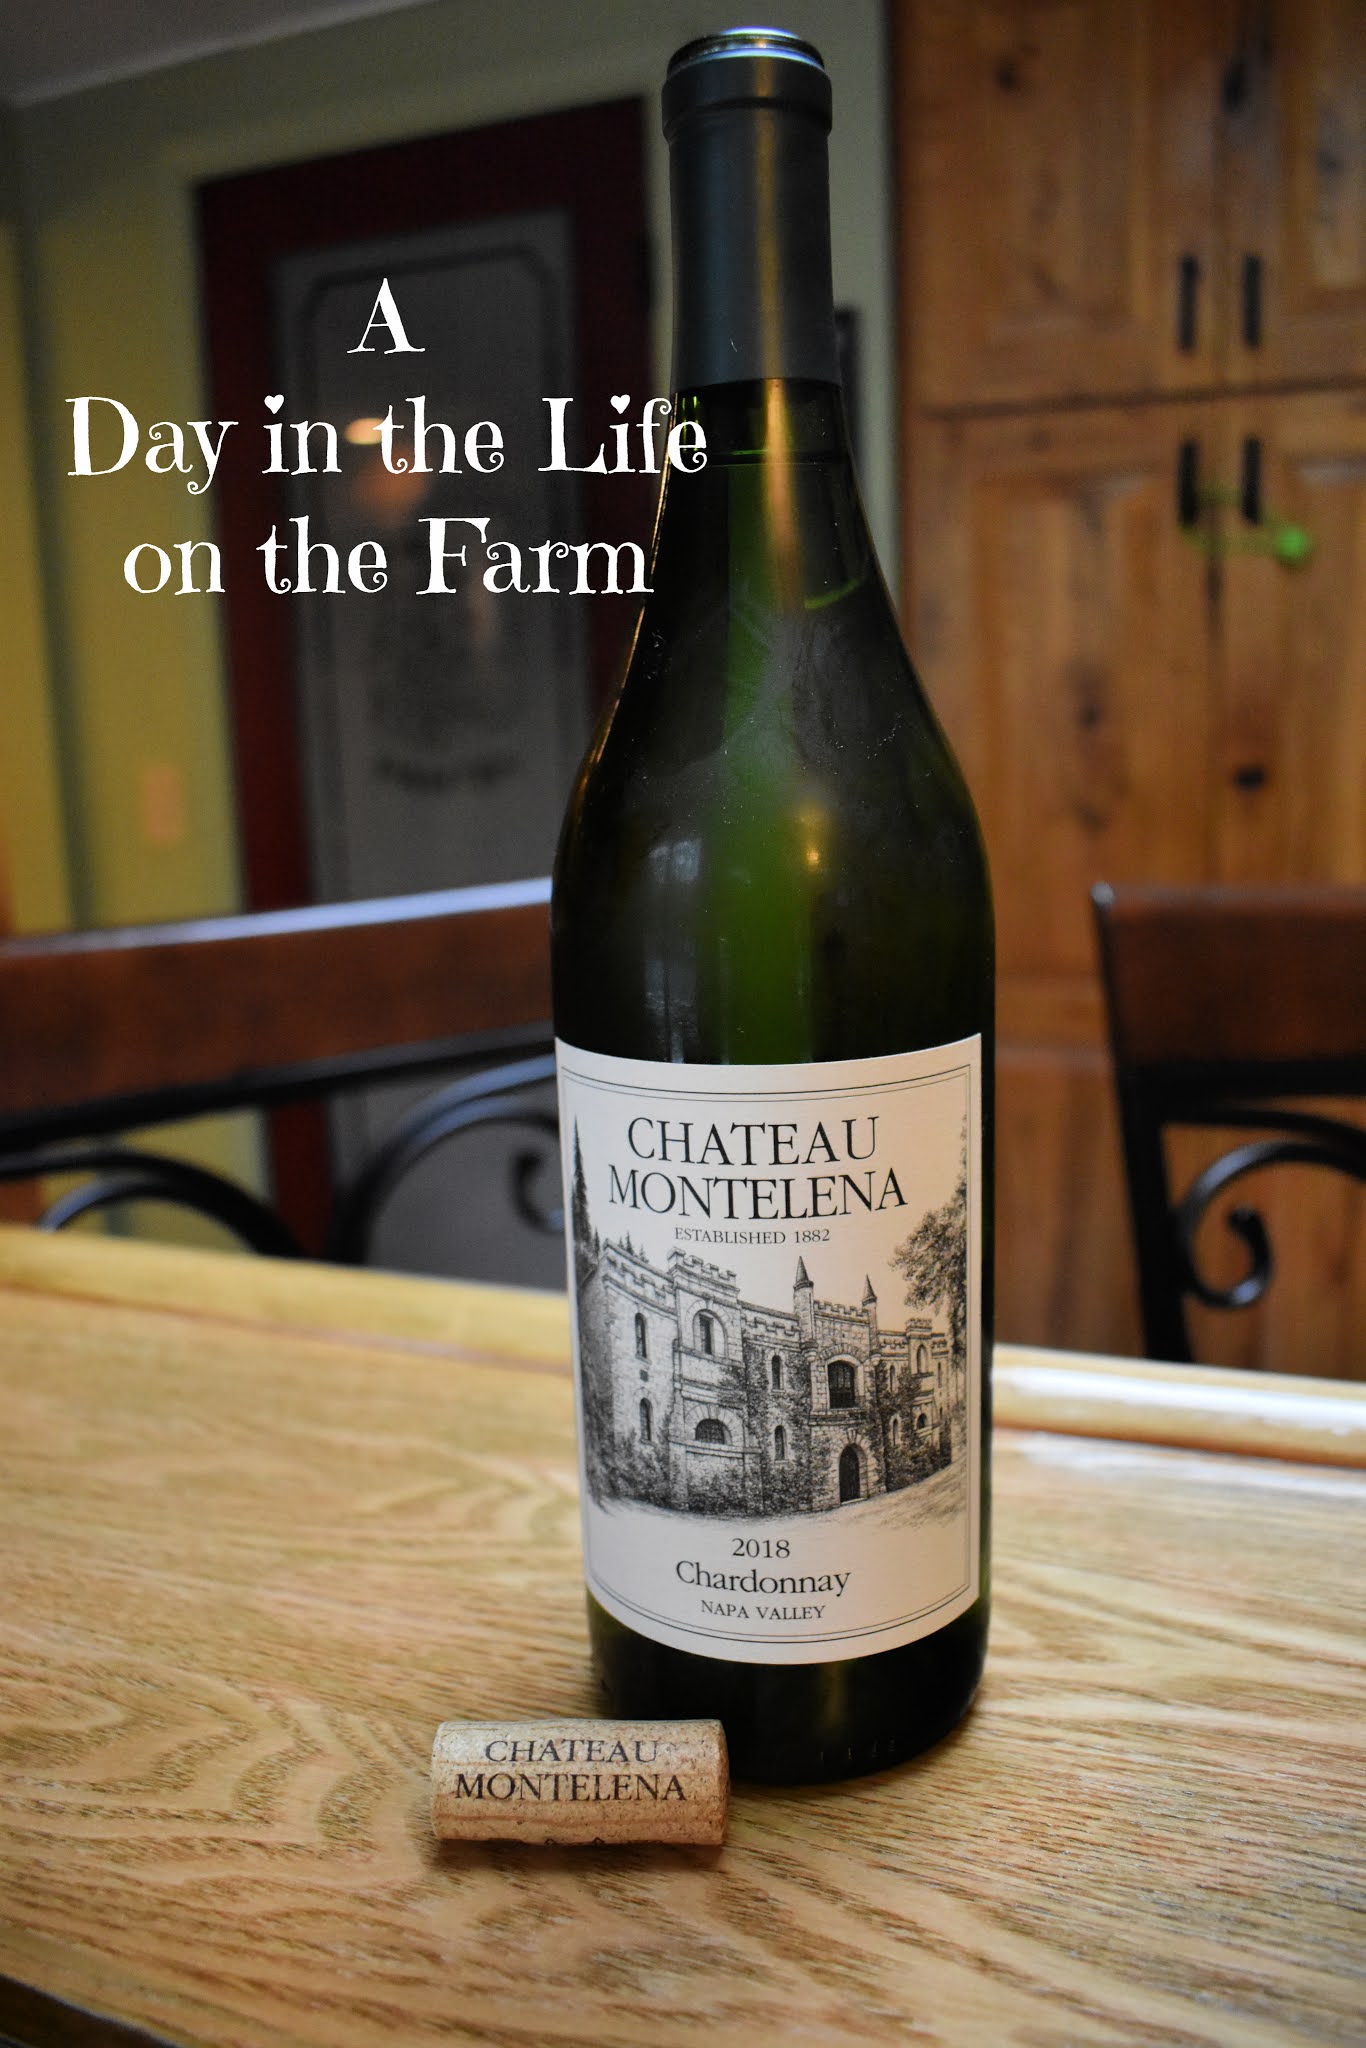 A Day in the Life on the Farm: Bottle Shock #FoodnFlix